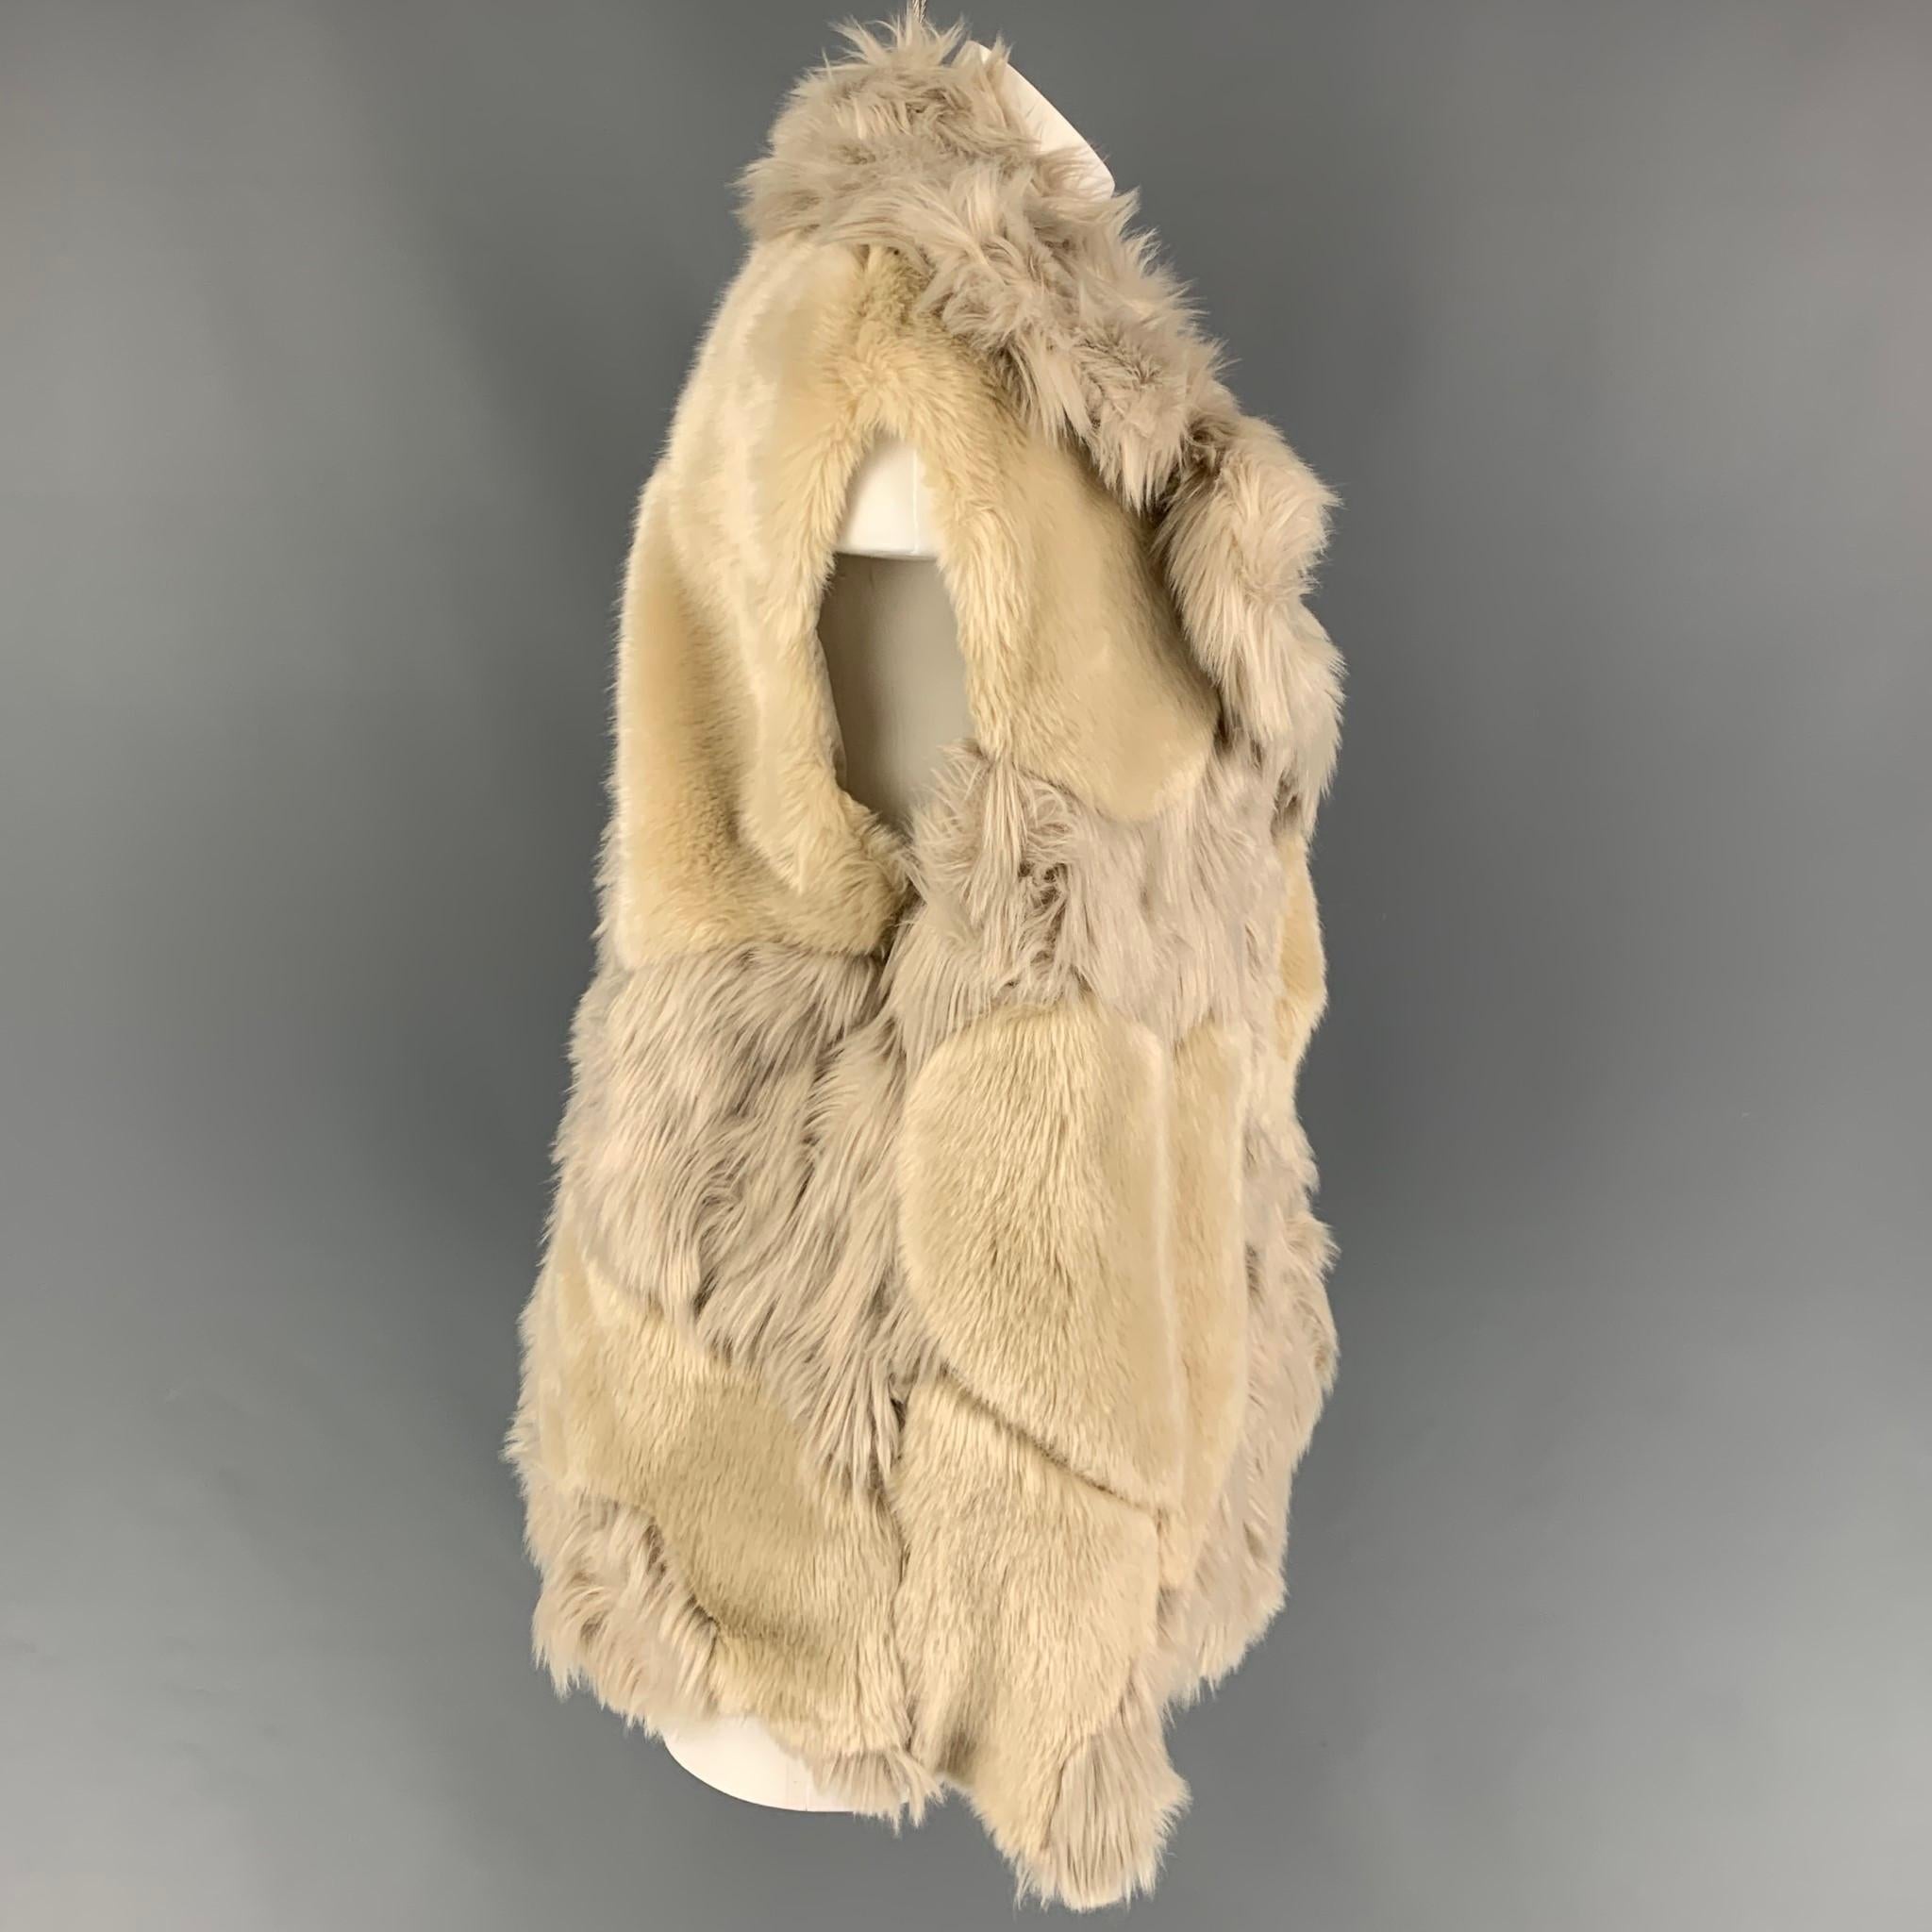 STELLA McCARTNEY 'Fur Free Fur' vest comes in a tan acrylic faux fur with a full liner featuring a large lapel design, slit pockets, and a hook & loop closure. Made in Hungary. 

Very Good Pre-Owned Condition.
Marked: 38
Original Retail Price: